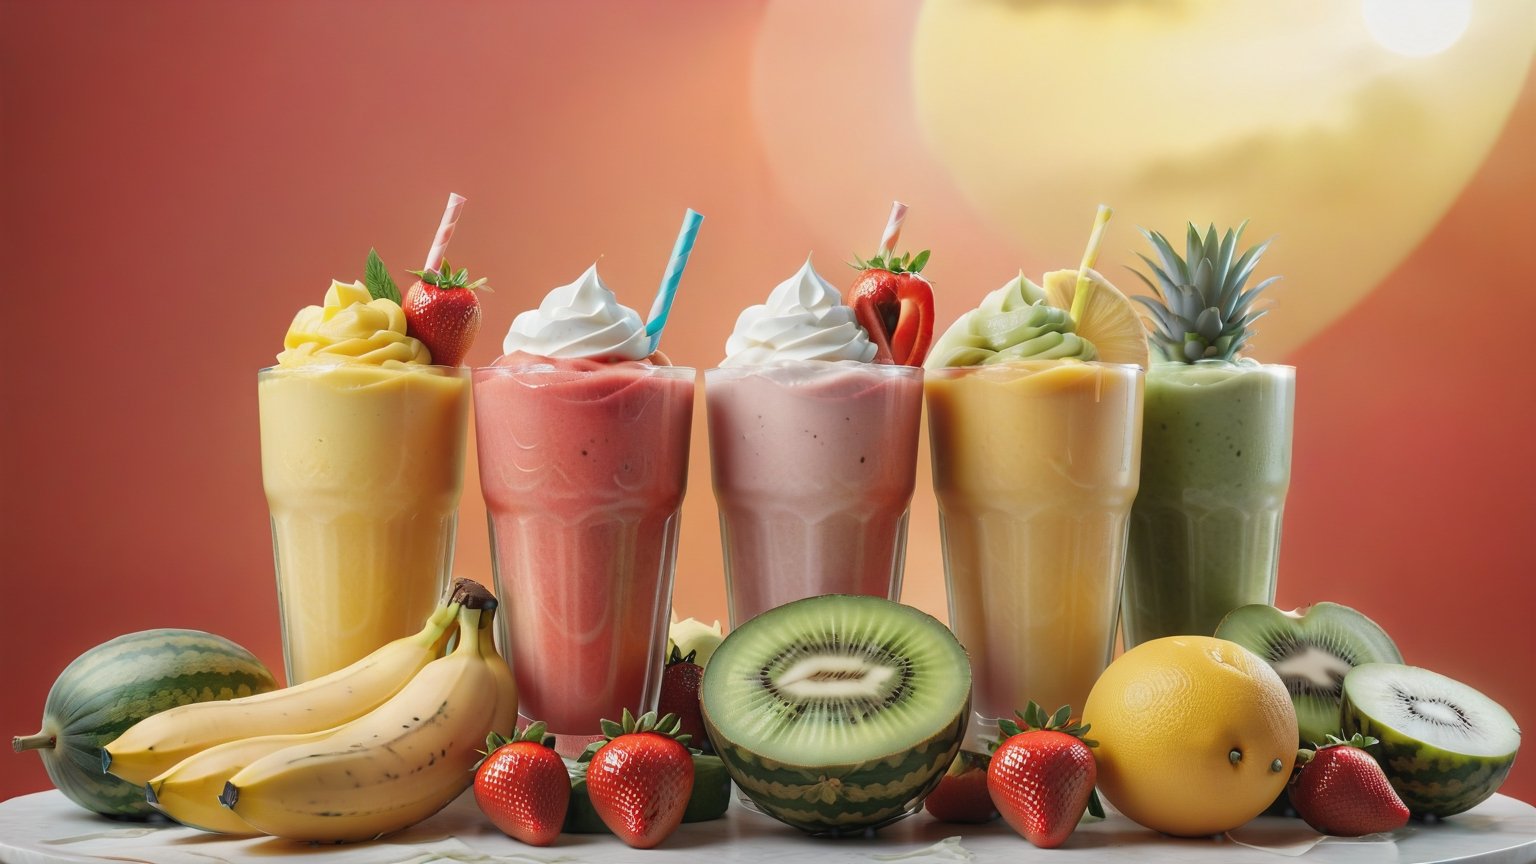 (best quality, 8K, highres, masterpiece) Create a realistic Food photography for advertising, 5 different color smoothies, watermelon, kiwi, banana, apple, strawberries, mix berries, yogurt, mango, pineapple, natural lighting, red pastel backdrop, realistic, short plastic cup